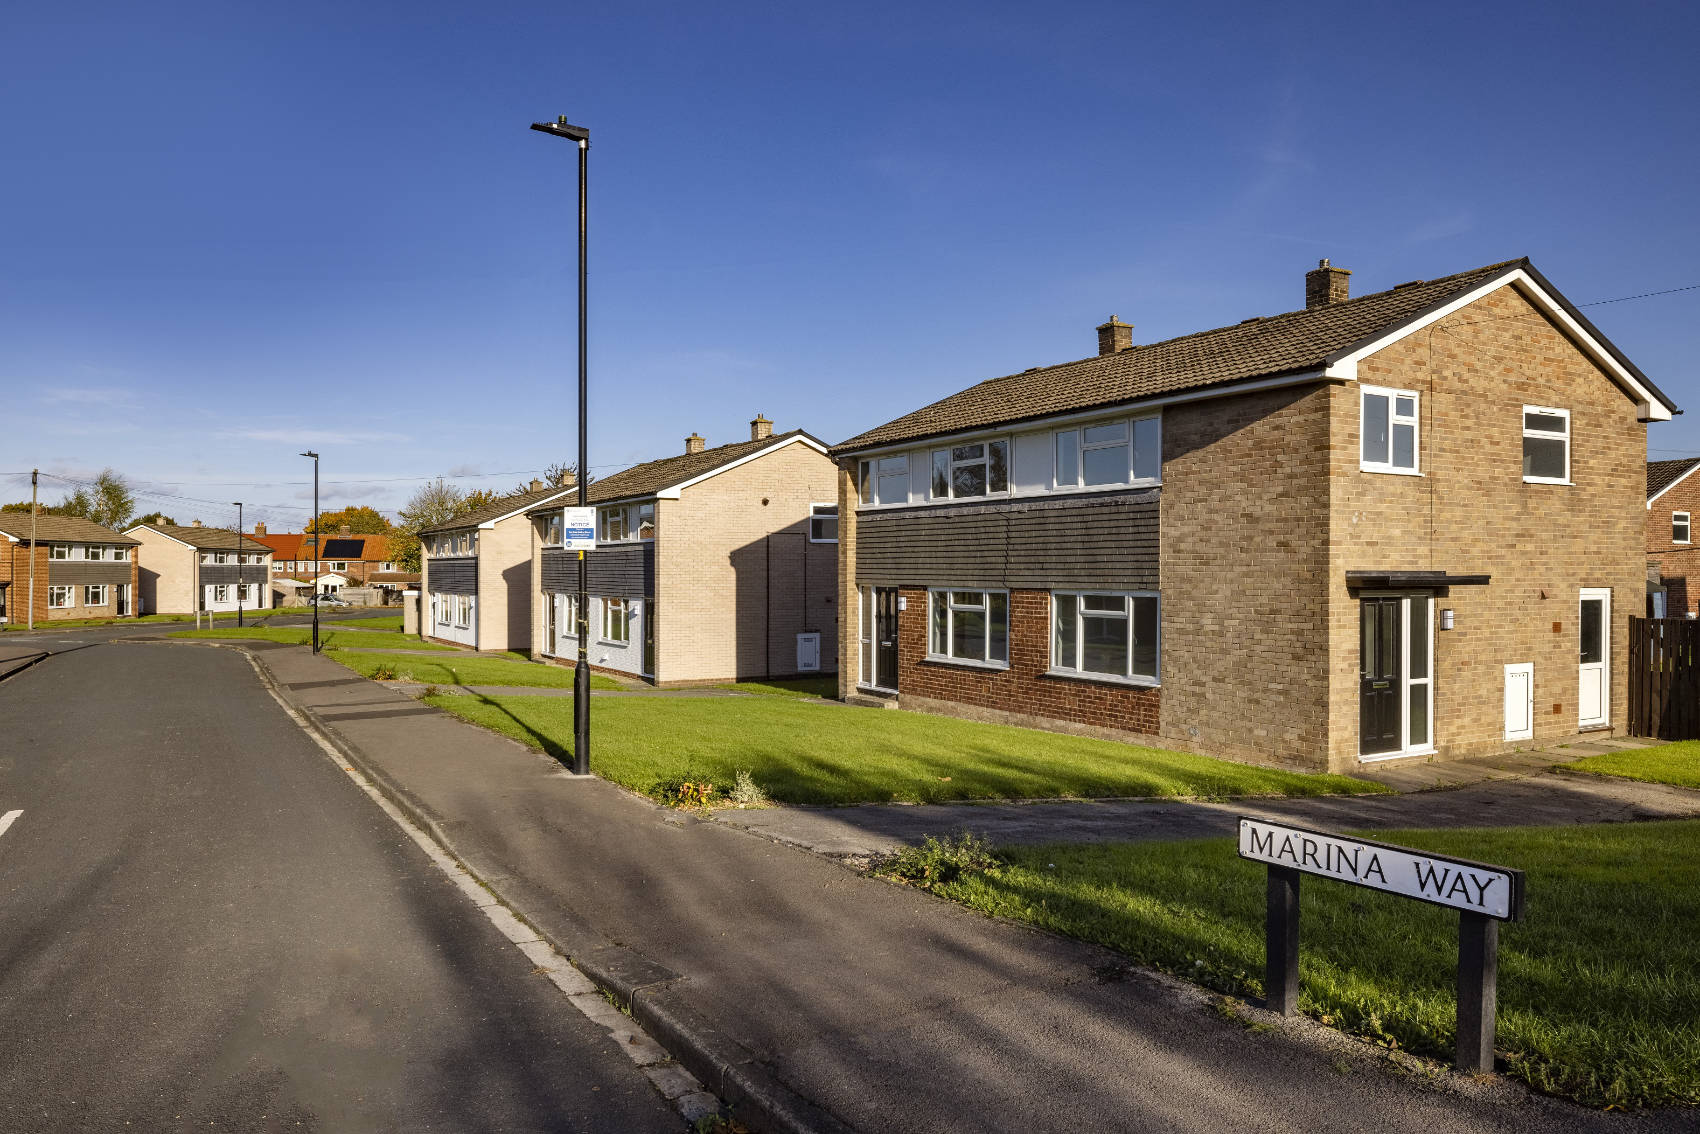 MOD homes in Ripon, Annington is preparing to launch the final two three-bedroom properties